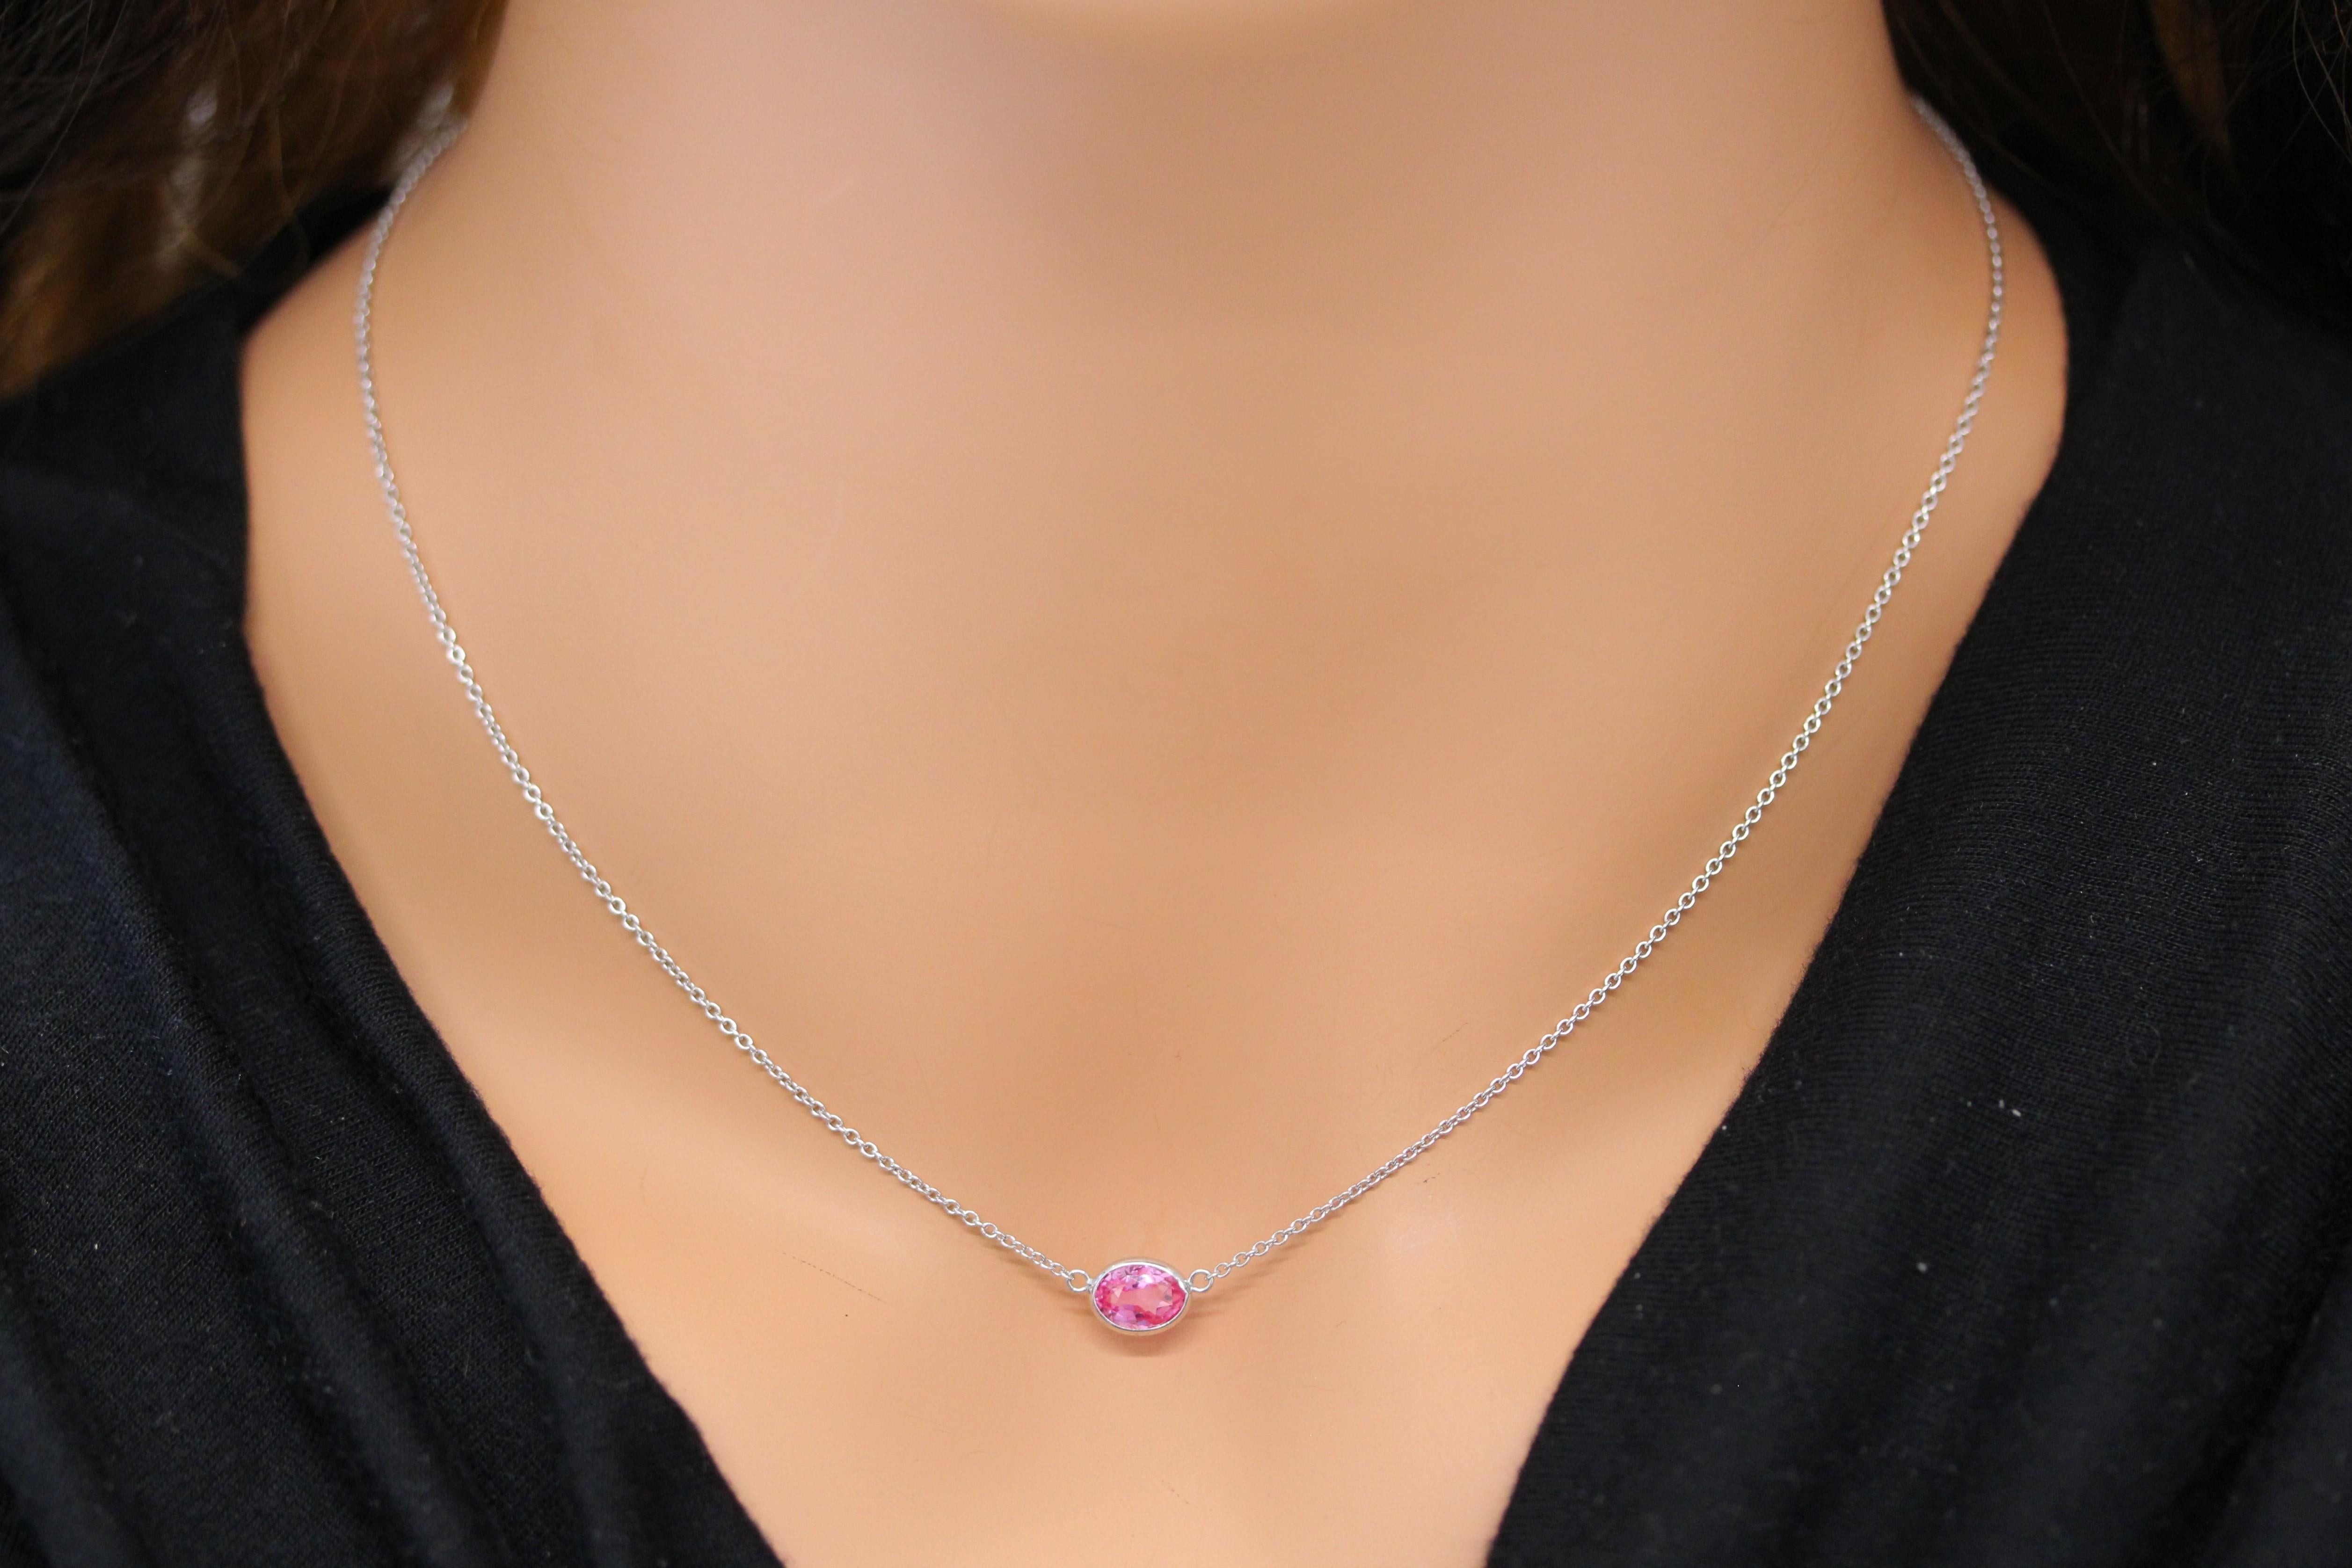 Contemporary 1.27 Carat Oval Padparadschah Pink Fashion Necklaces In 14k White Gold For Sale